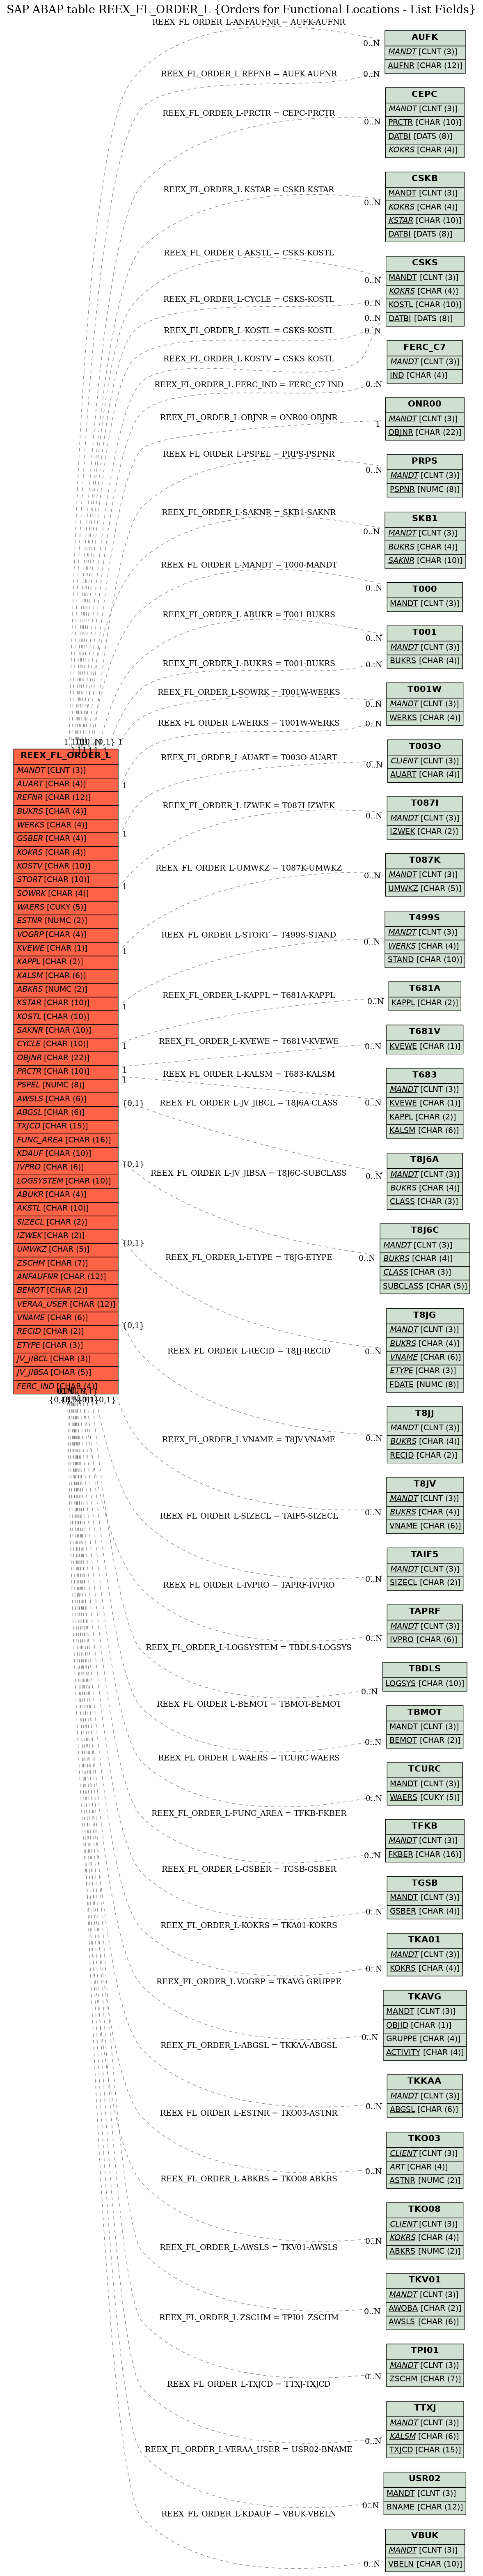 E-R Diagram for table REEX_FL_ORDER_L (Orders for Functional Locations - List Fields)